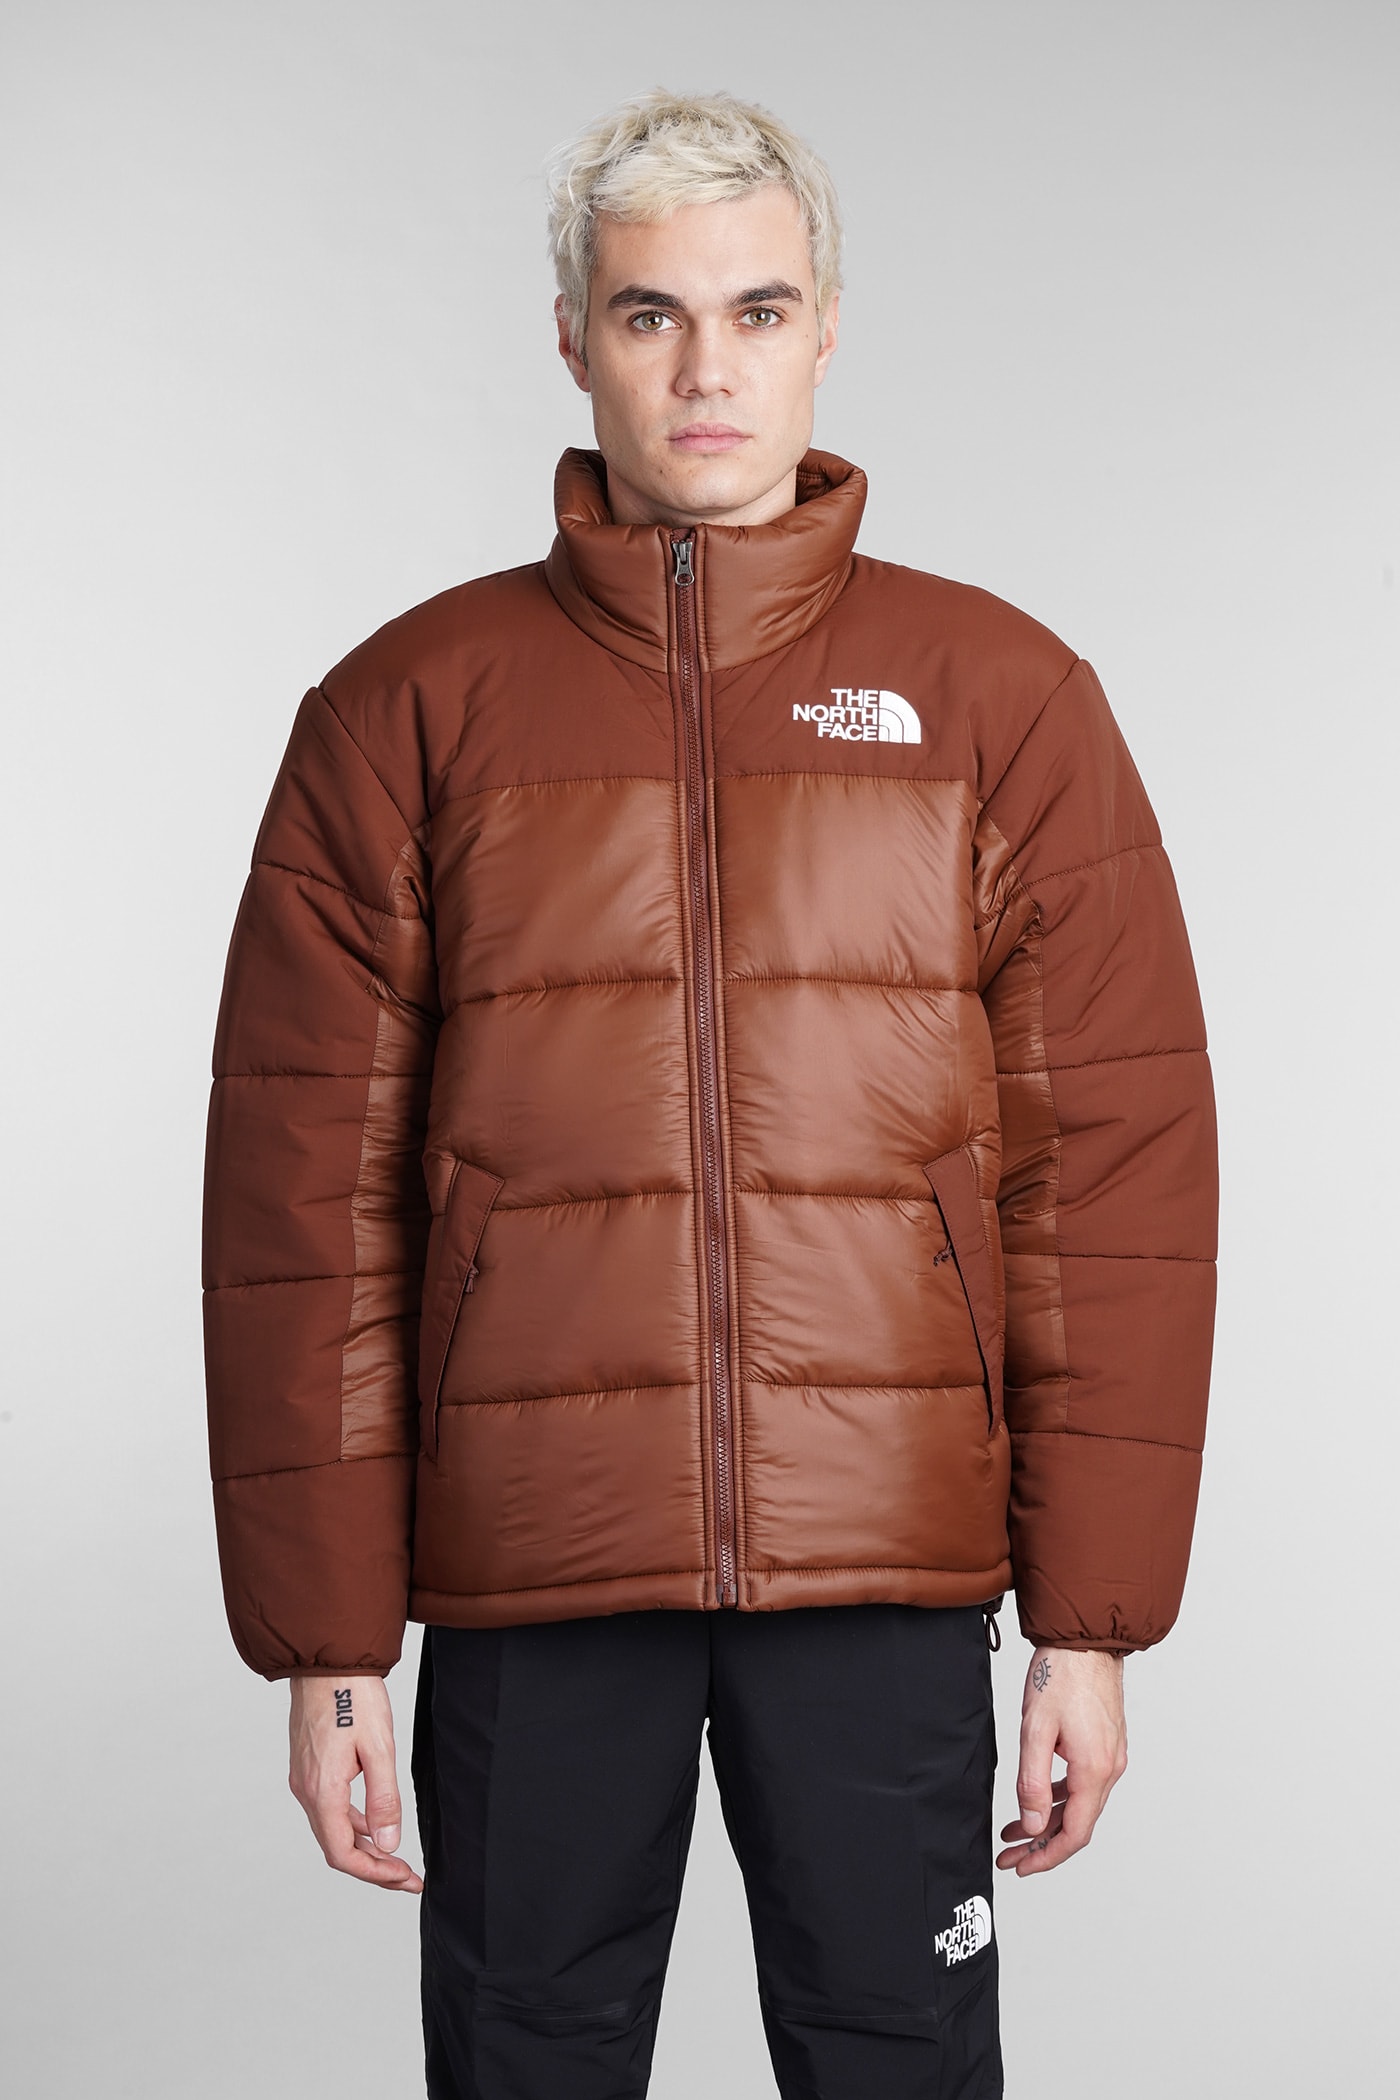 THE NORTH FACE PUFFER IN BROWN NYLON